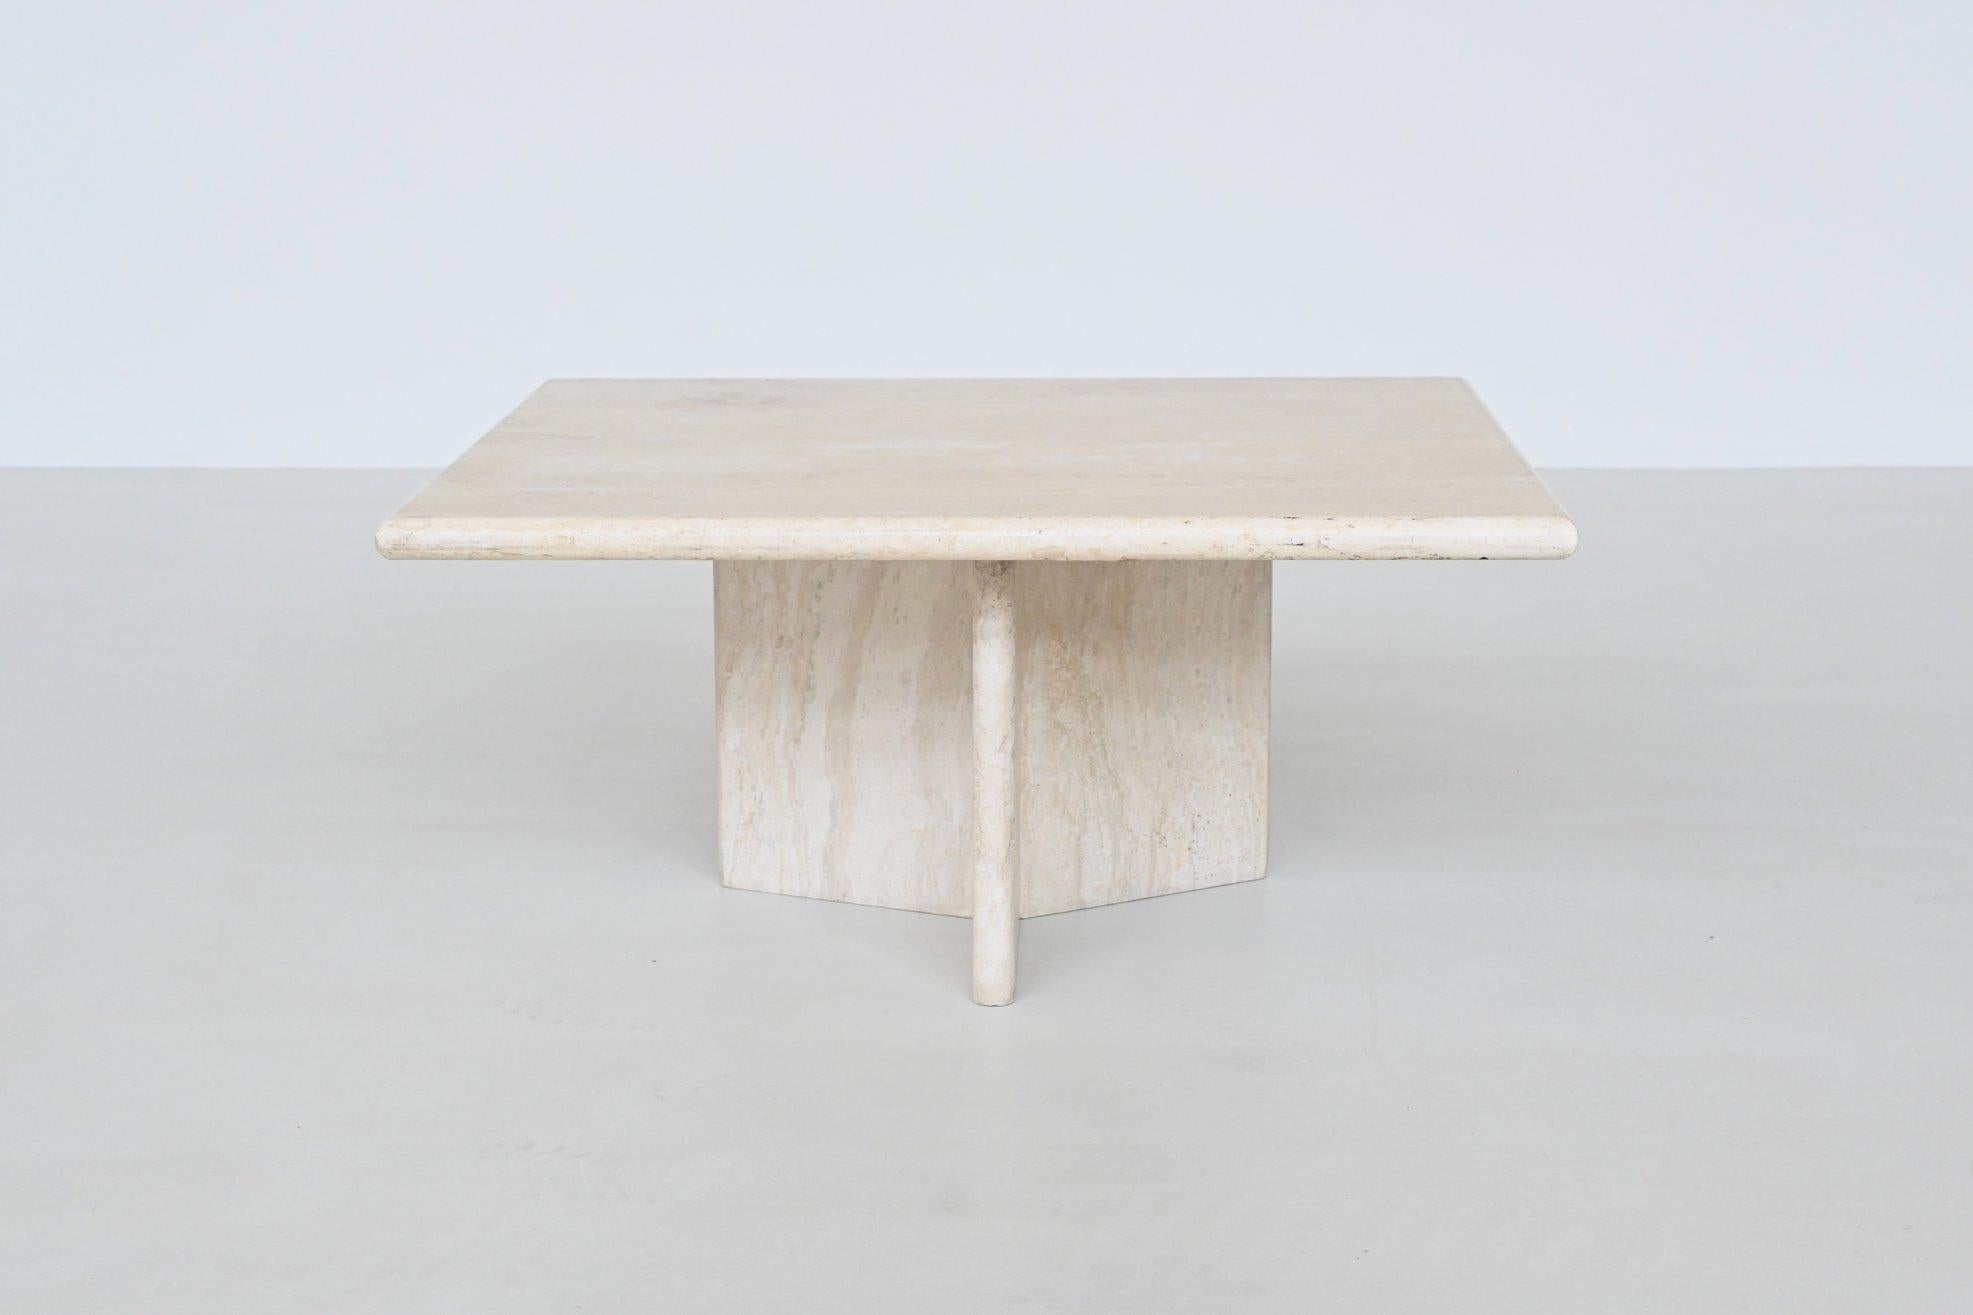 Beautiful square shaped Italian coffee table by unknown designer or manufacturer, Italy 1970. This handcrafted table is made of beautiful travertine and feature a stunning pattern and texture. It has a square shaped top with a rounded edge which is